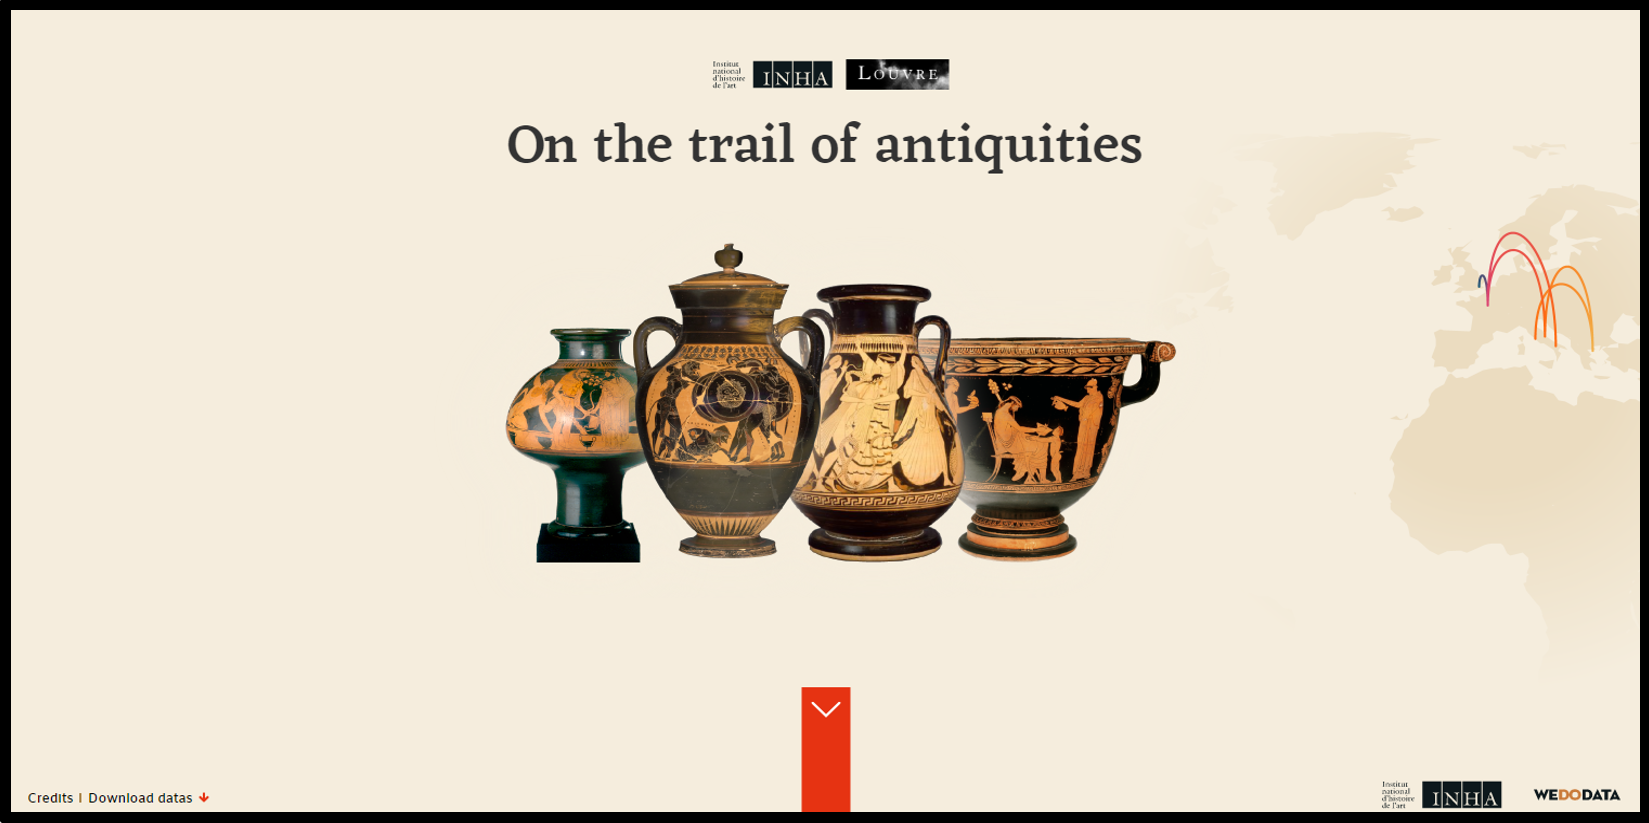 On the Trail of Antiquities 웹사이트 가기